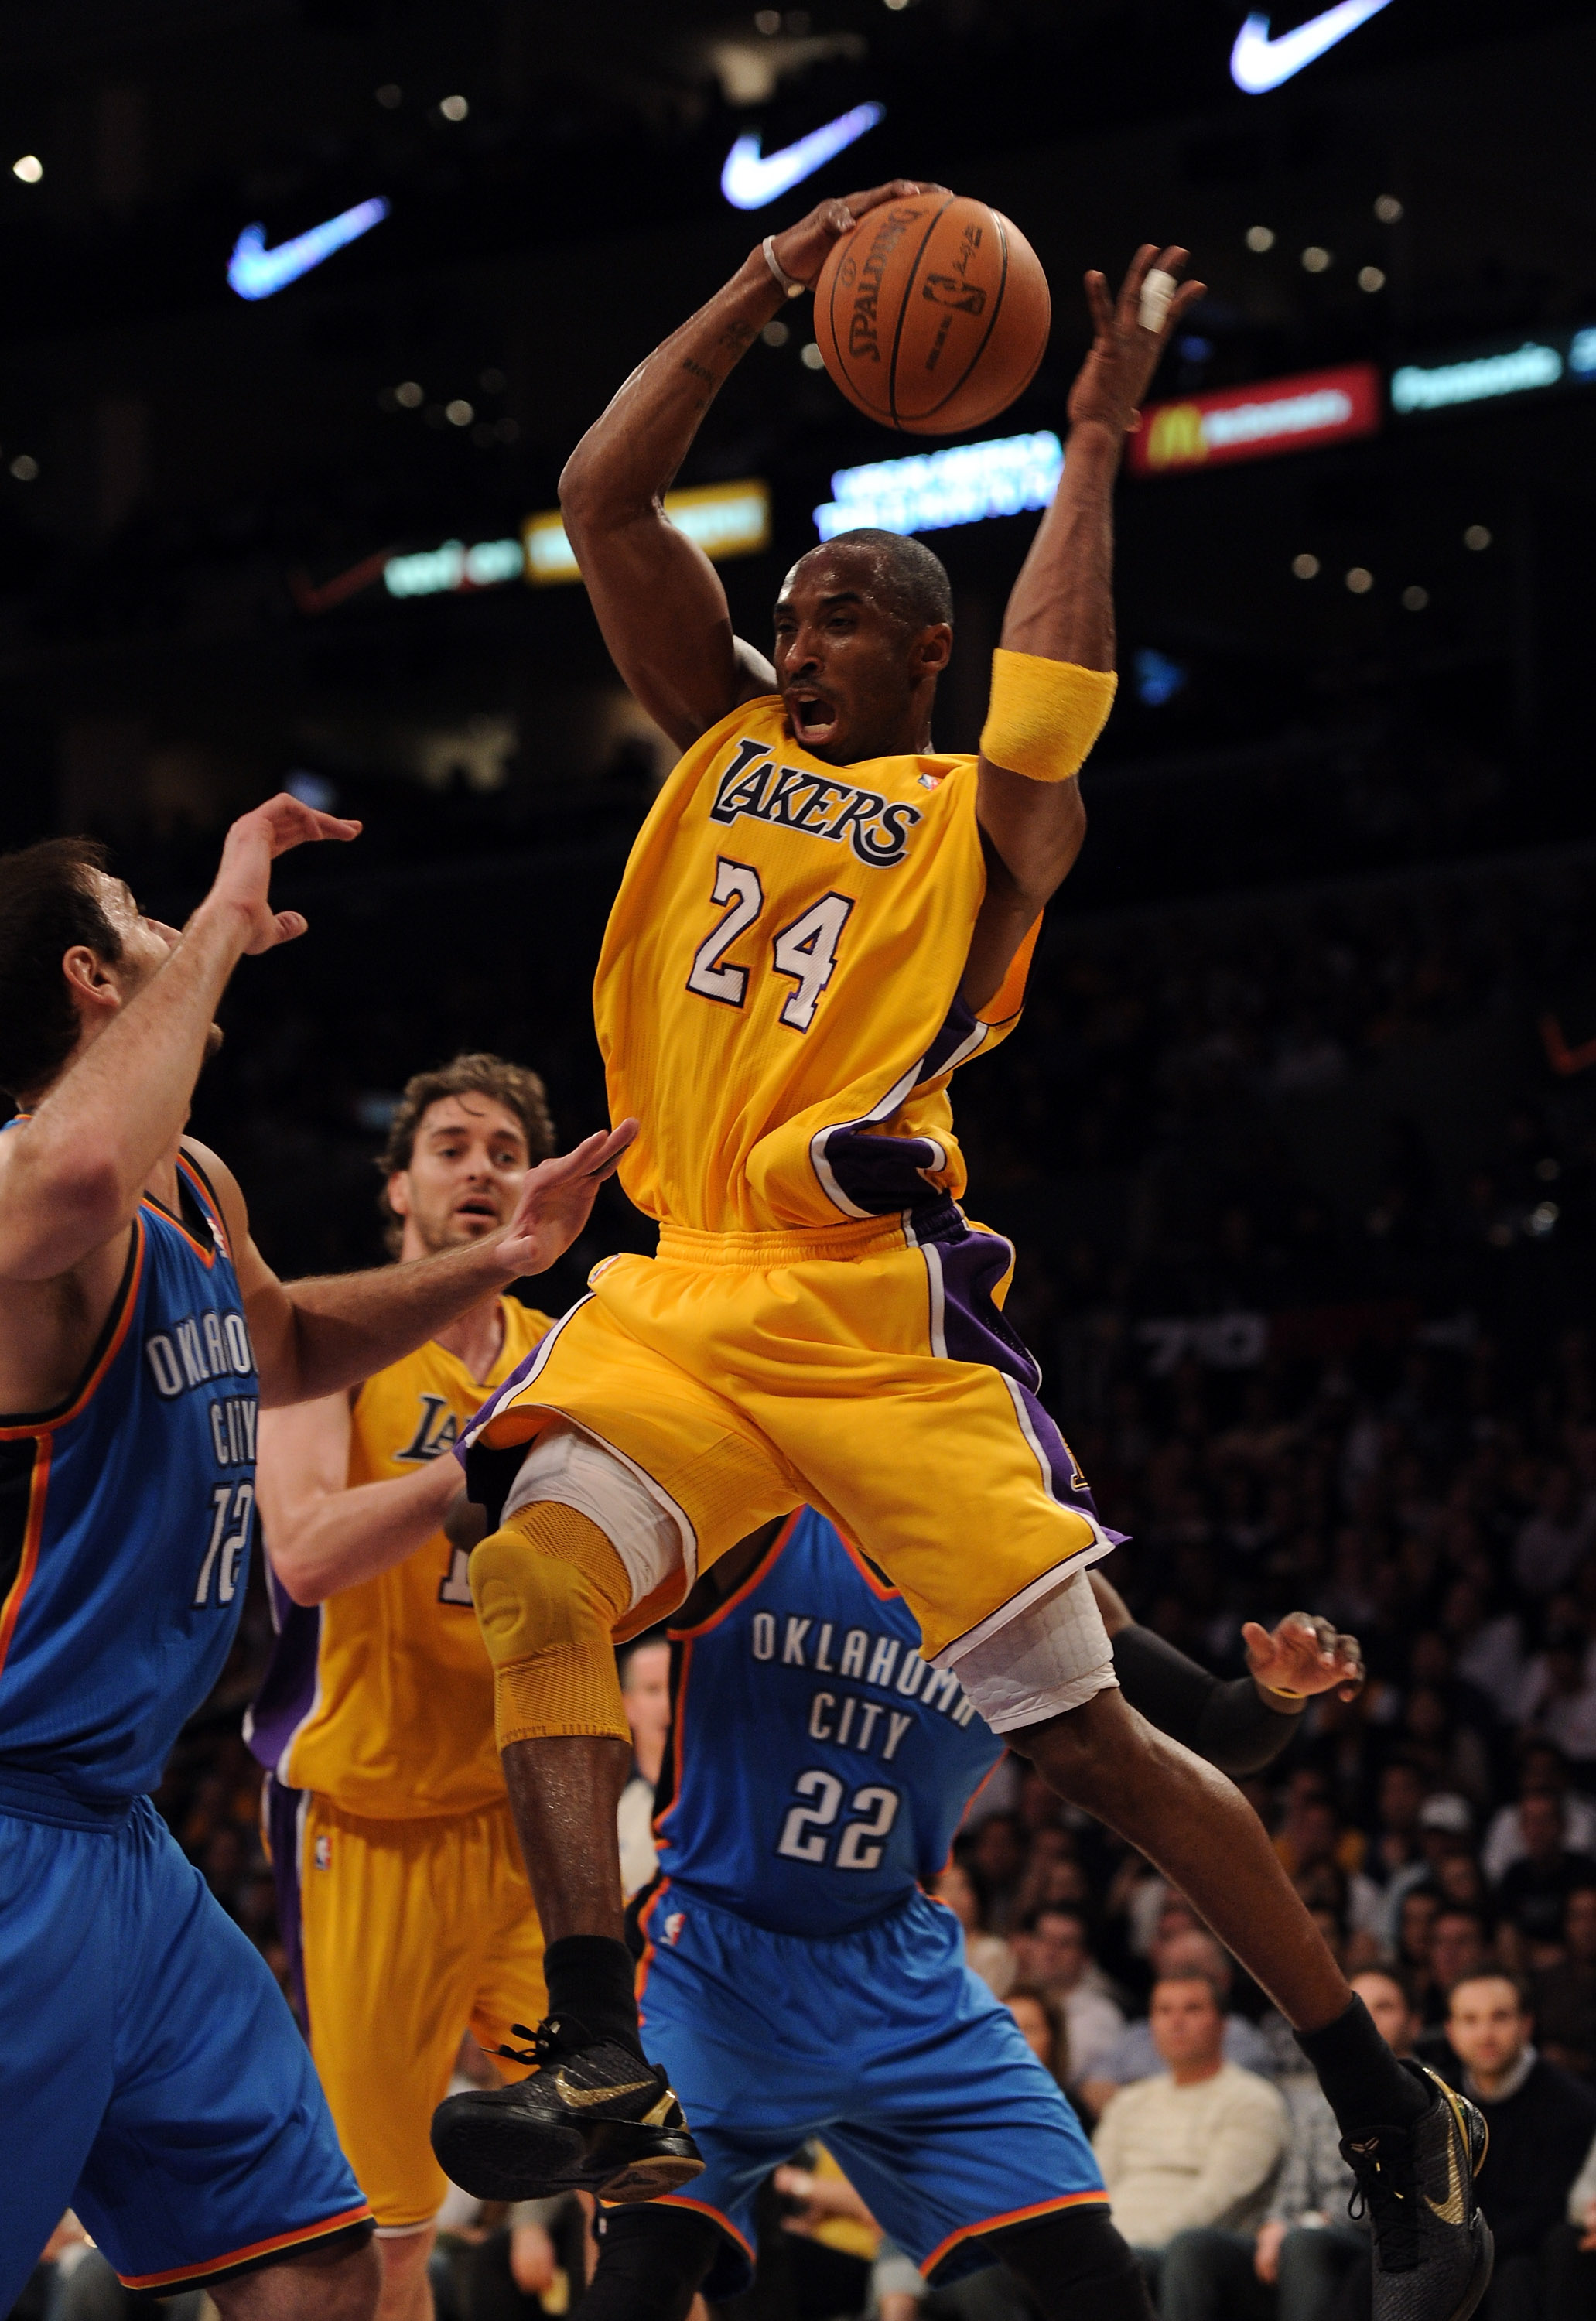 Top 20 Kobe Bryant Quotes From The First Half Of The 2010-2011 Season